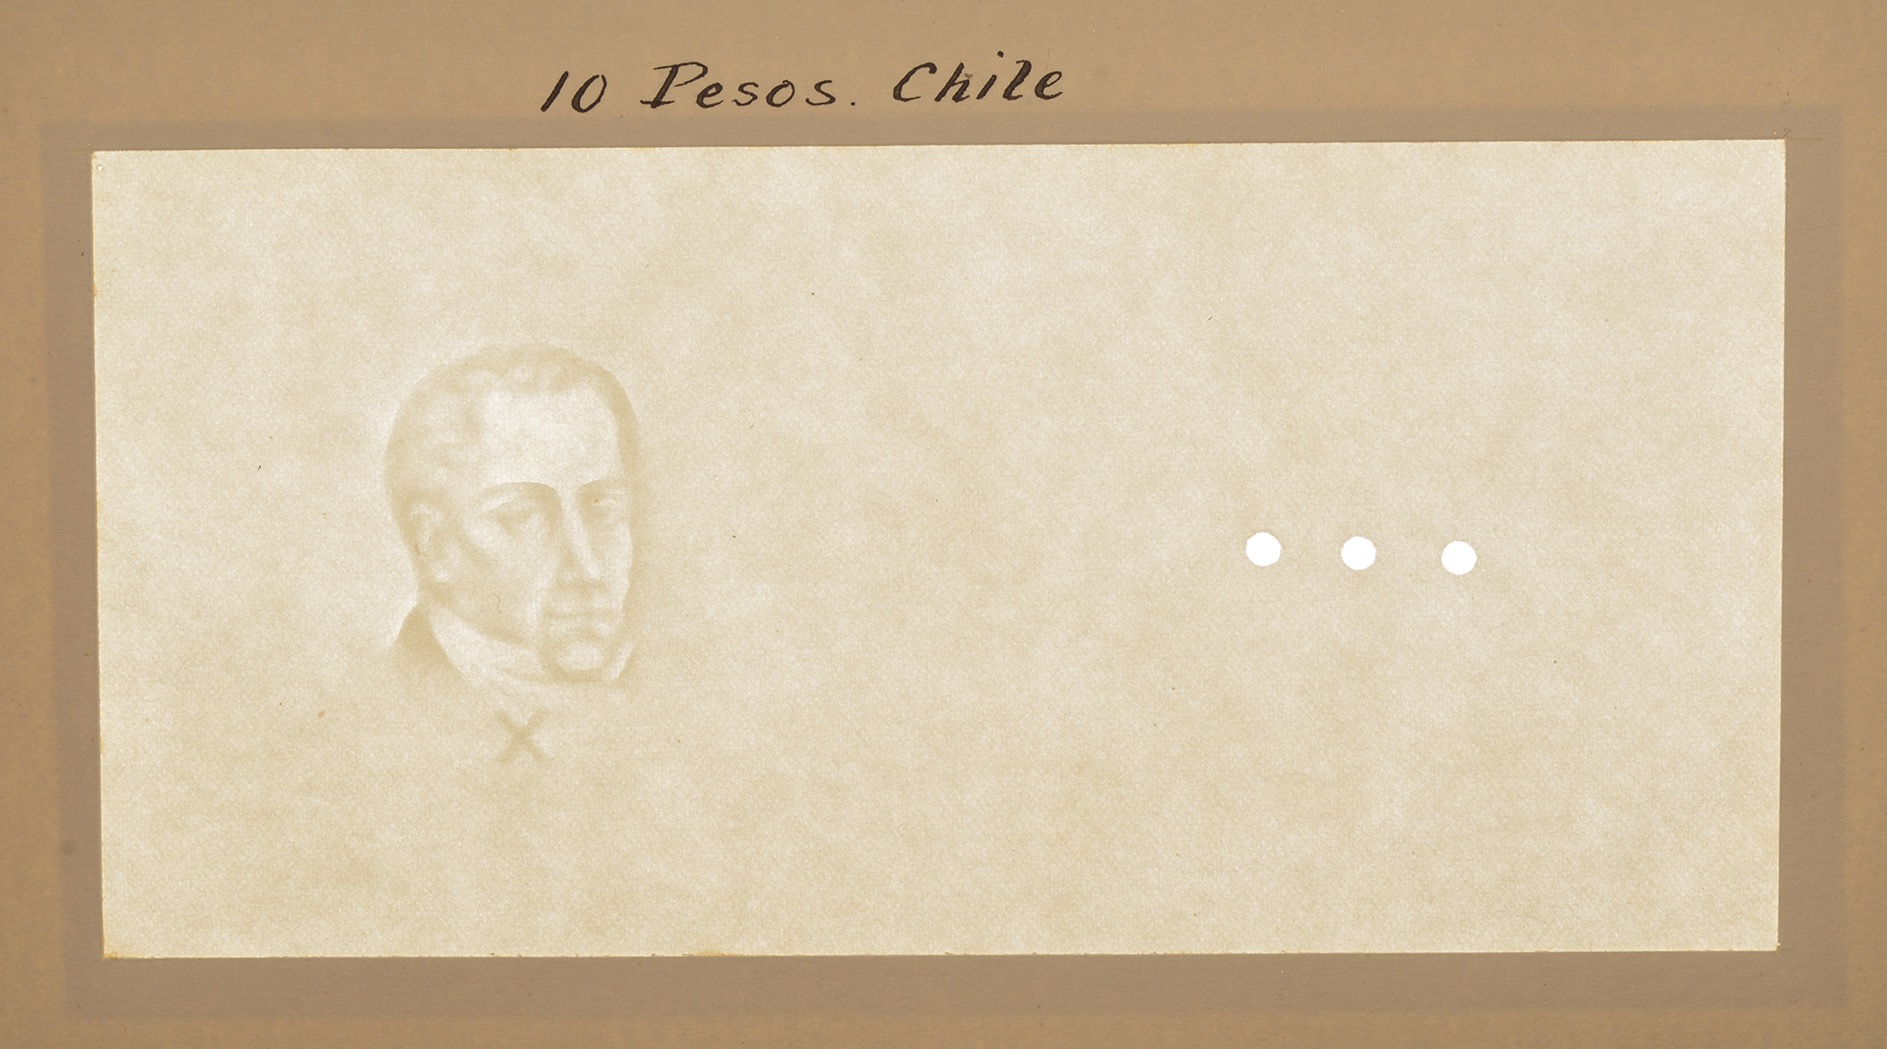 Banco Central de Chile, watermarked paper for the 10 (3) and 20 Pesos (2), issue of...